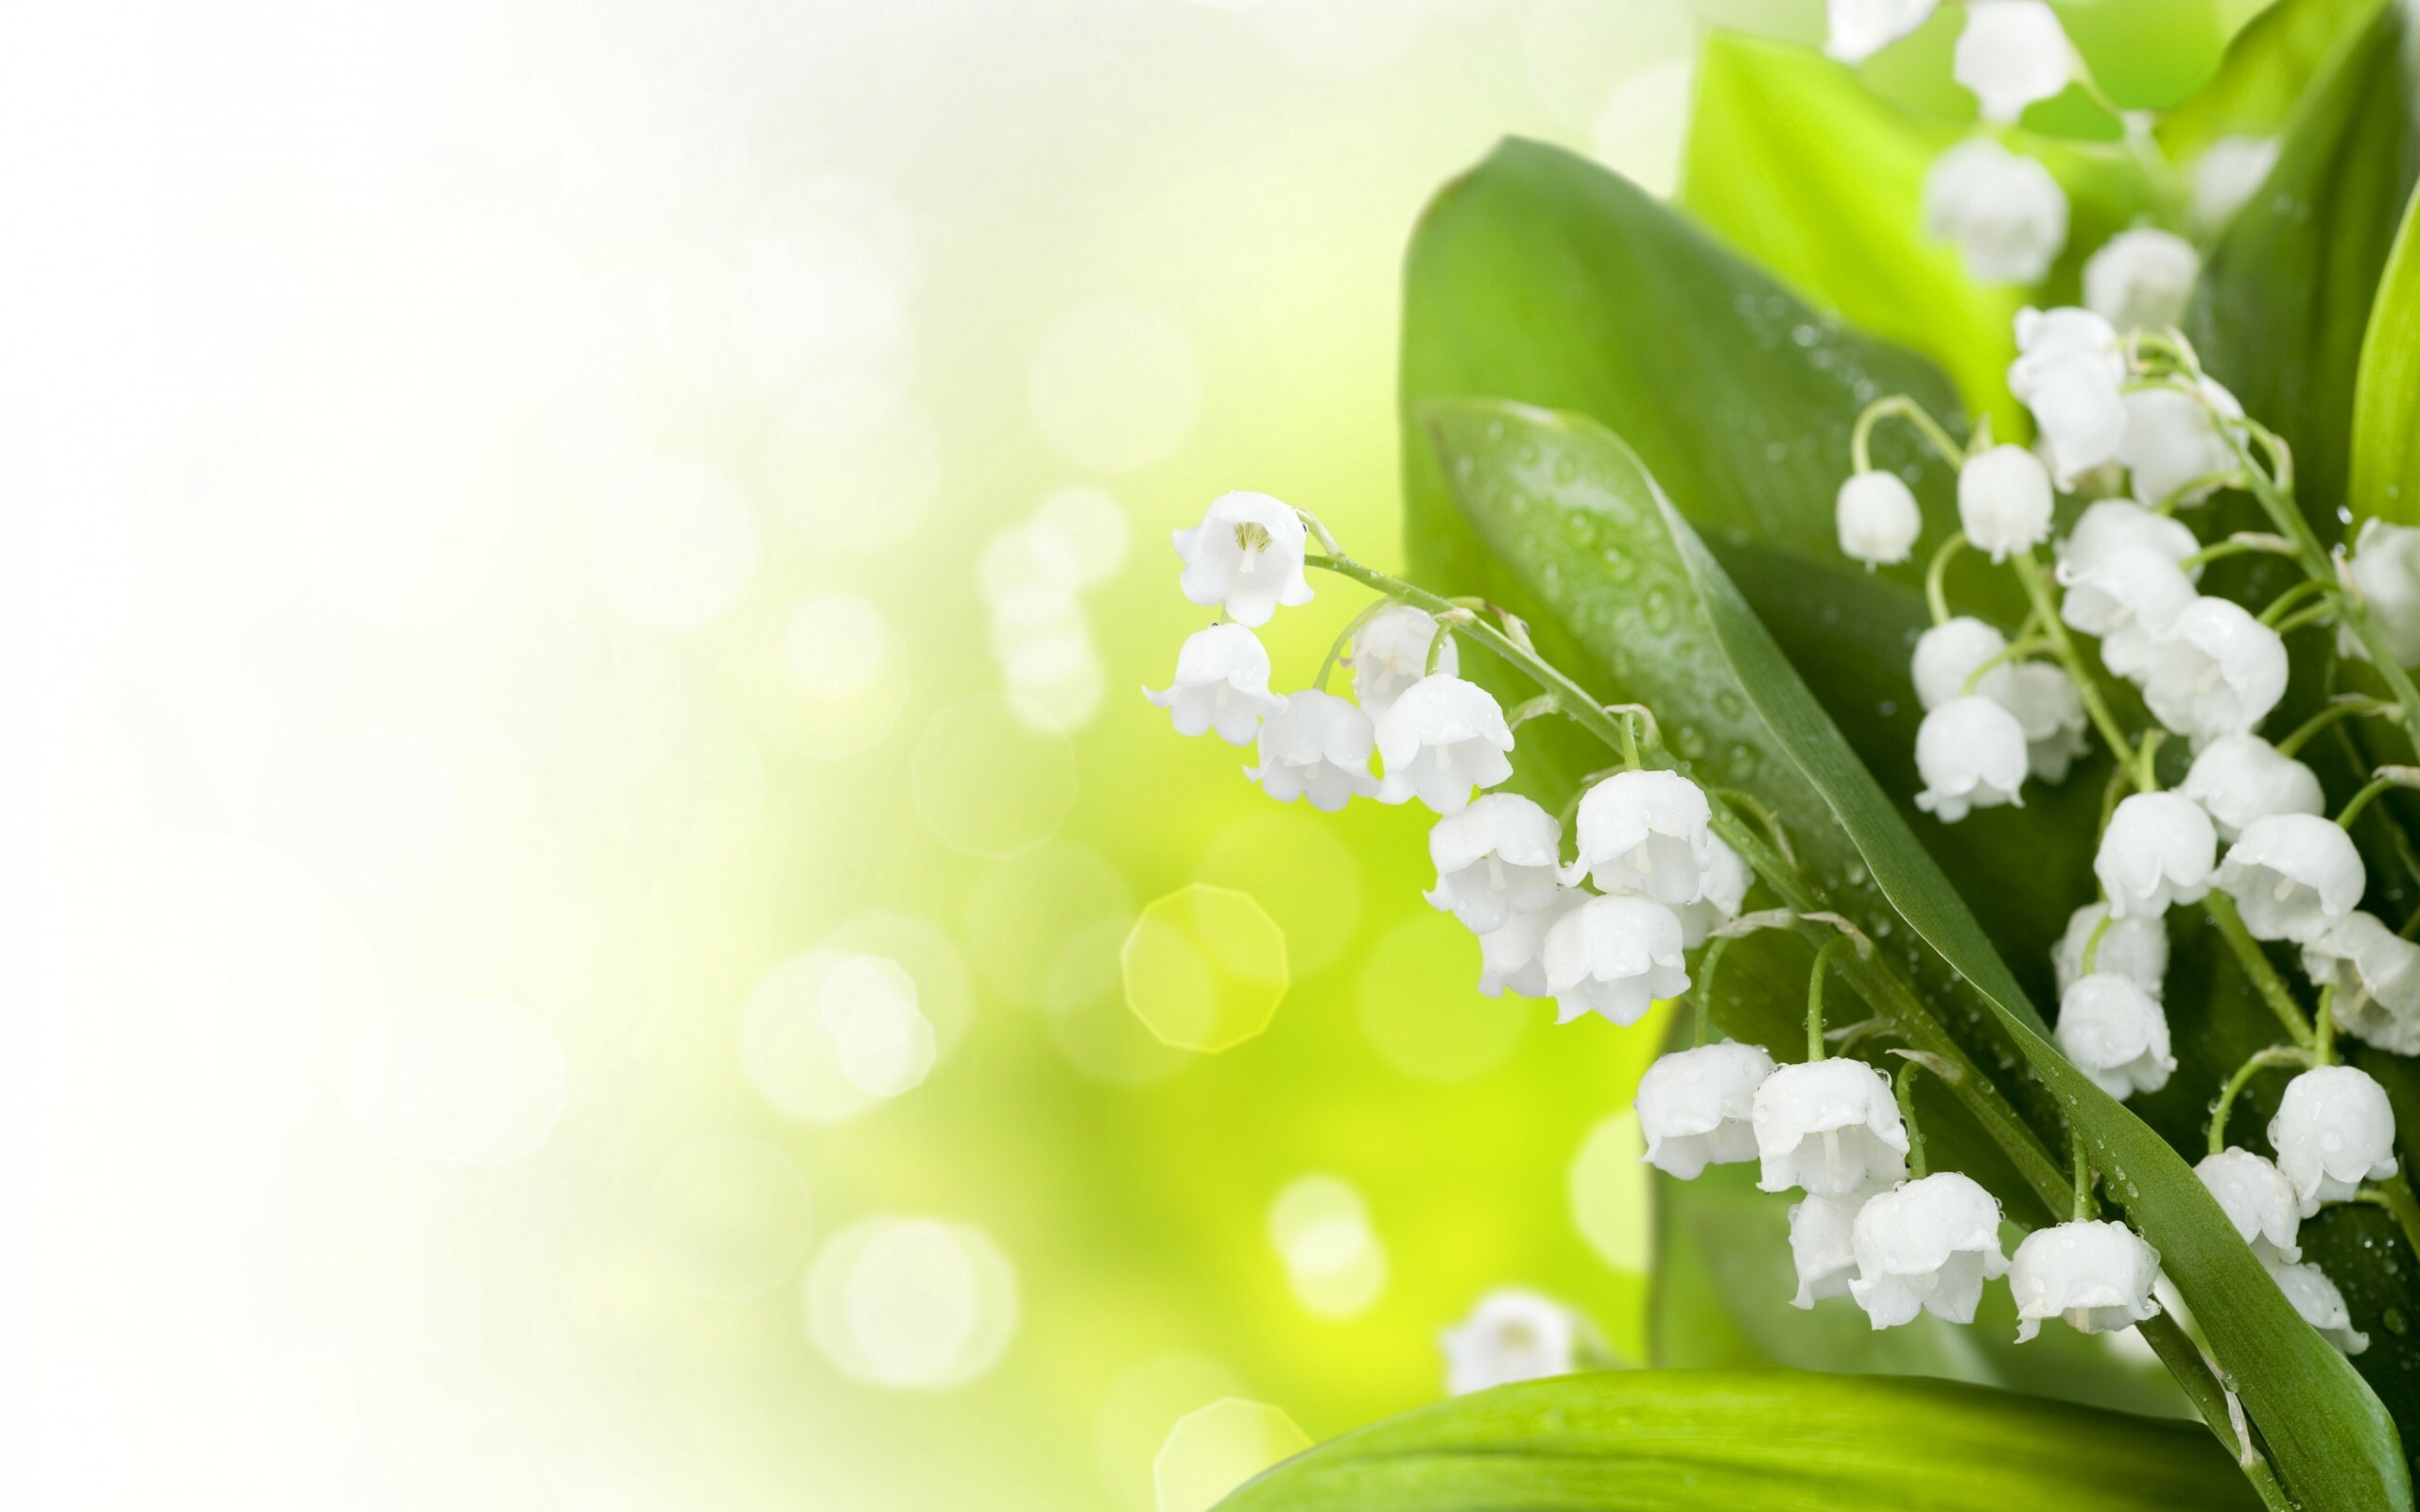 Lily of the Valley: A delicate woodland plant is famous for its sweetly scented, bell-shaped white flowers. 2560x1600 HD Wallpaper.